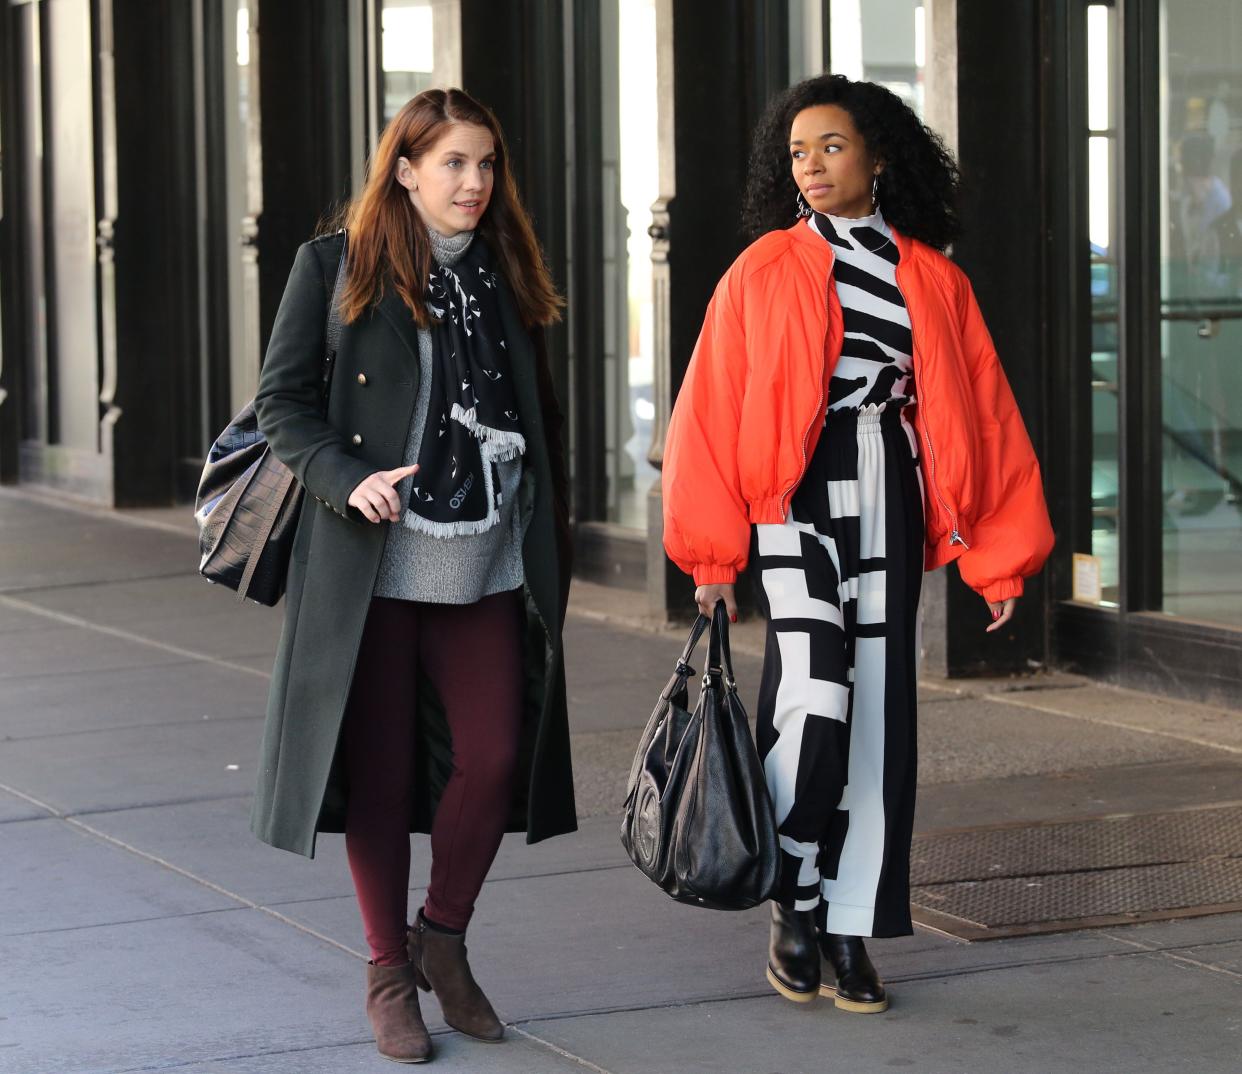 Anna Chlumsky and co-star Alexis Floyd are seen on the set of Netflix series "Inventing Anna" on Oct. 14, 2020, in New York City.